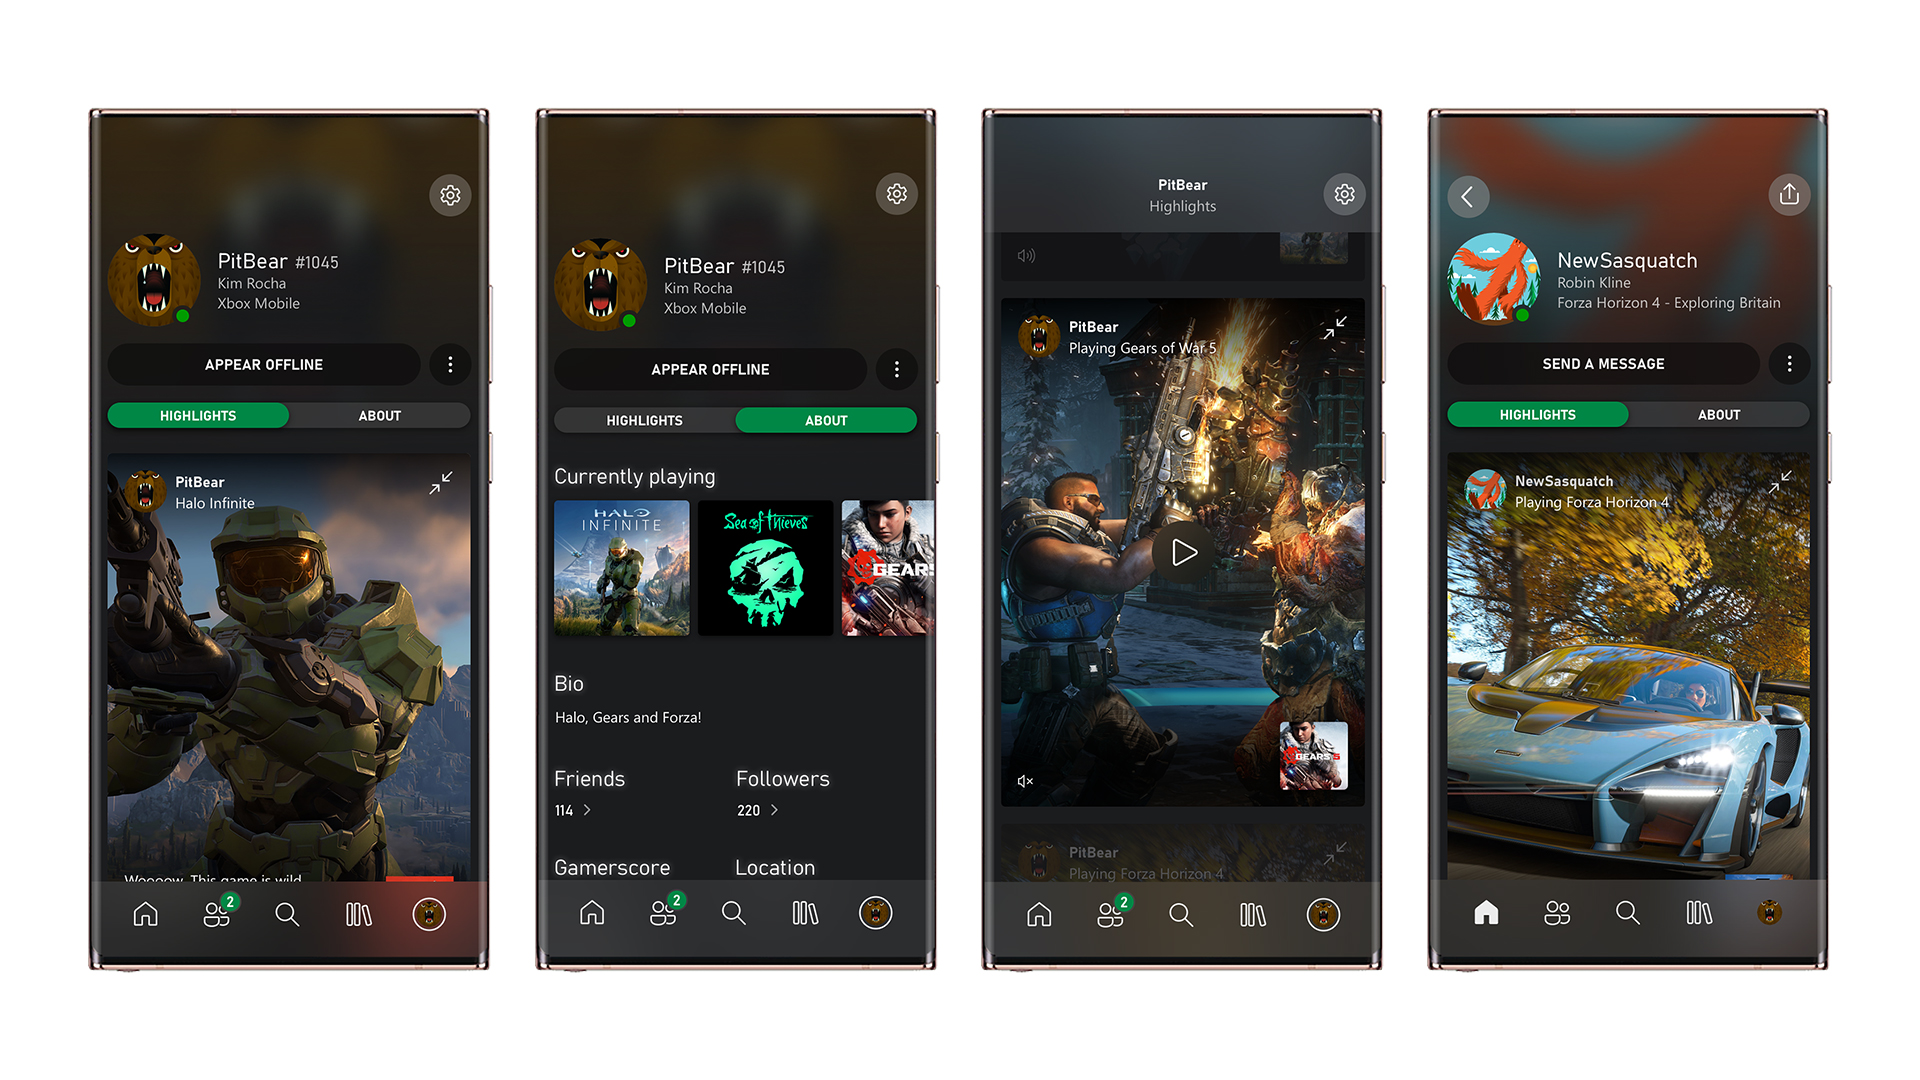 New Xbox App (Beta) on Mobile now available on Android and iOS Xbox